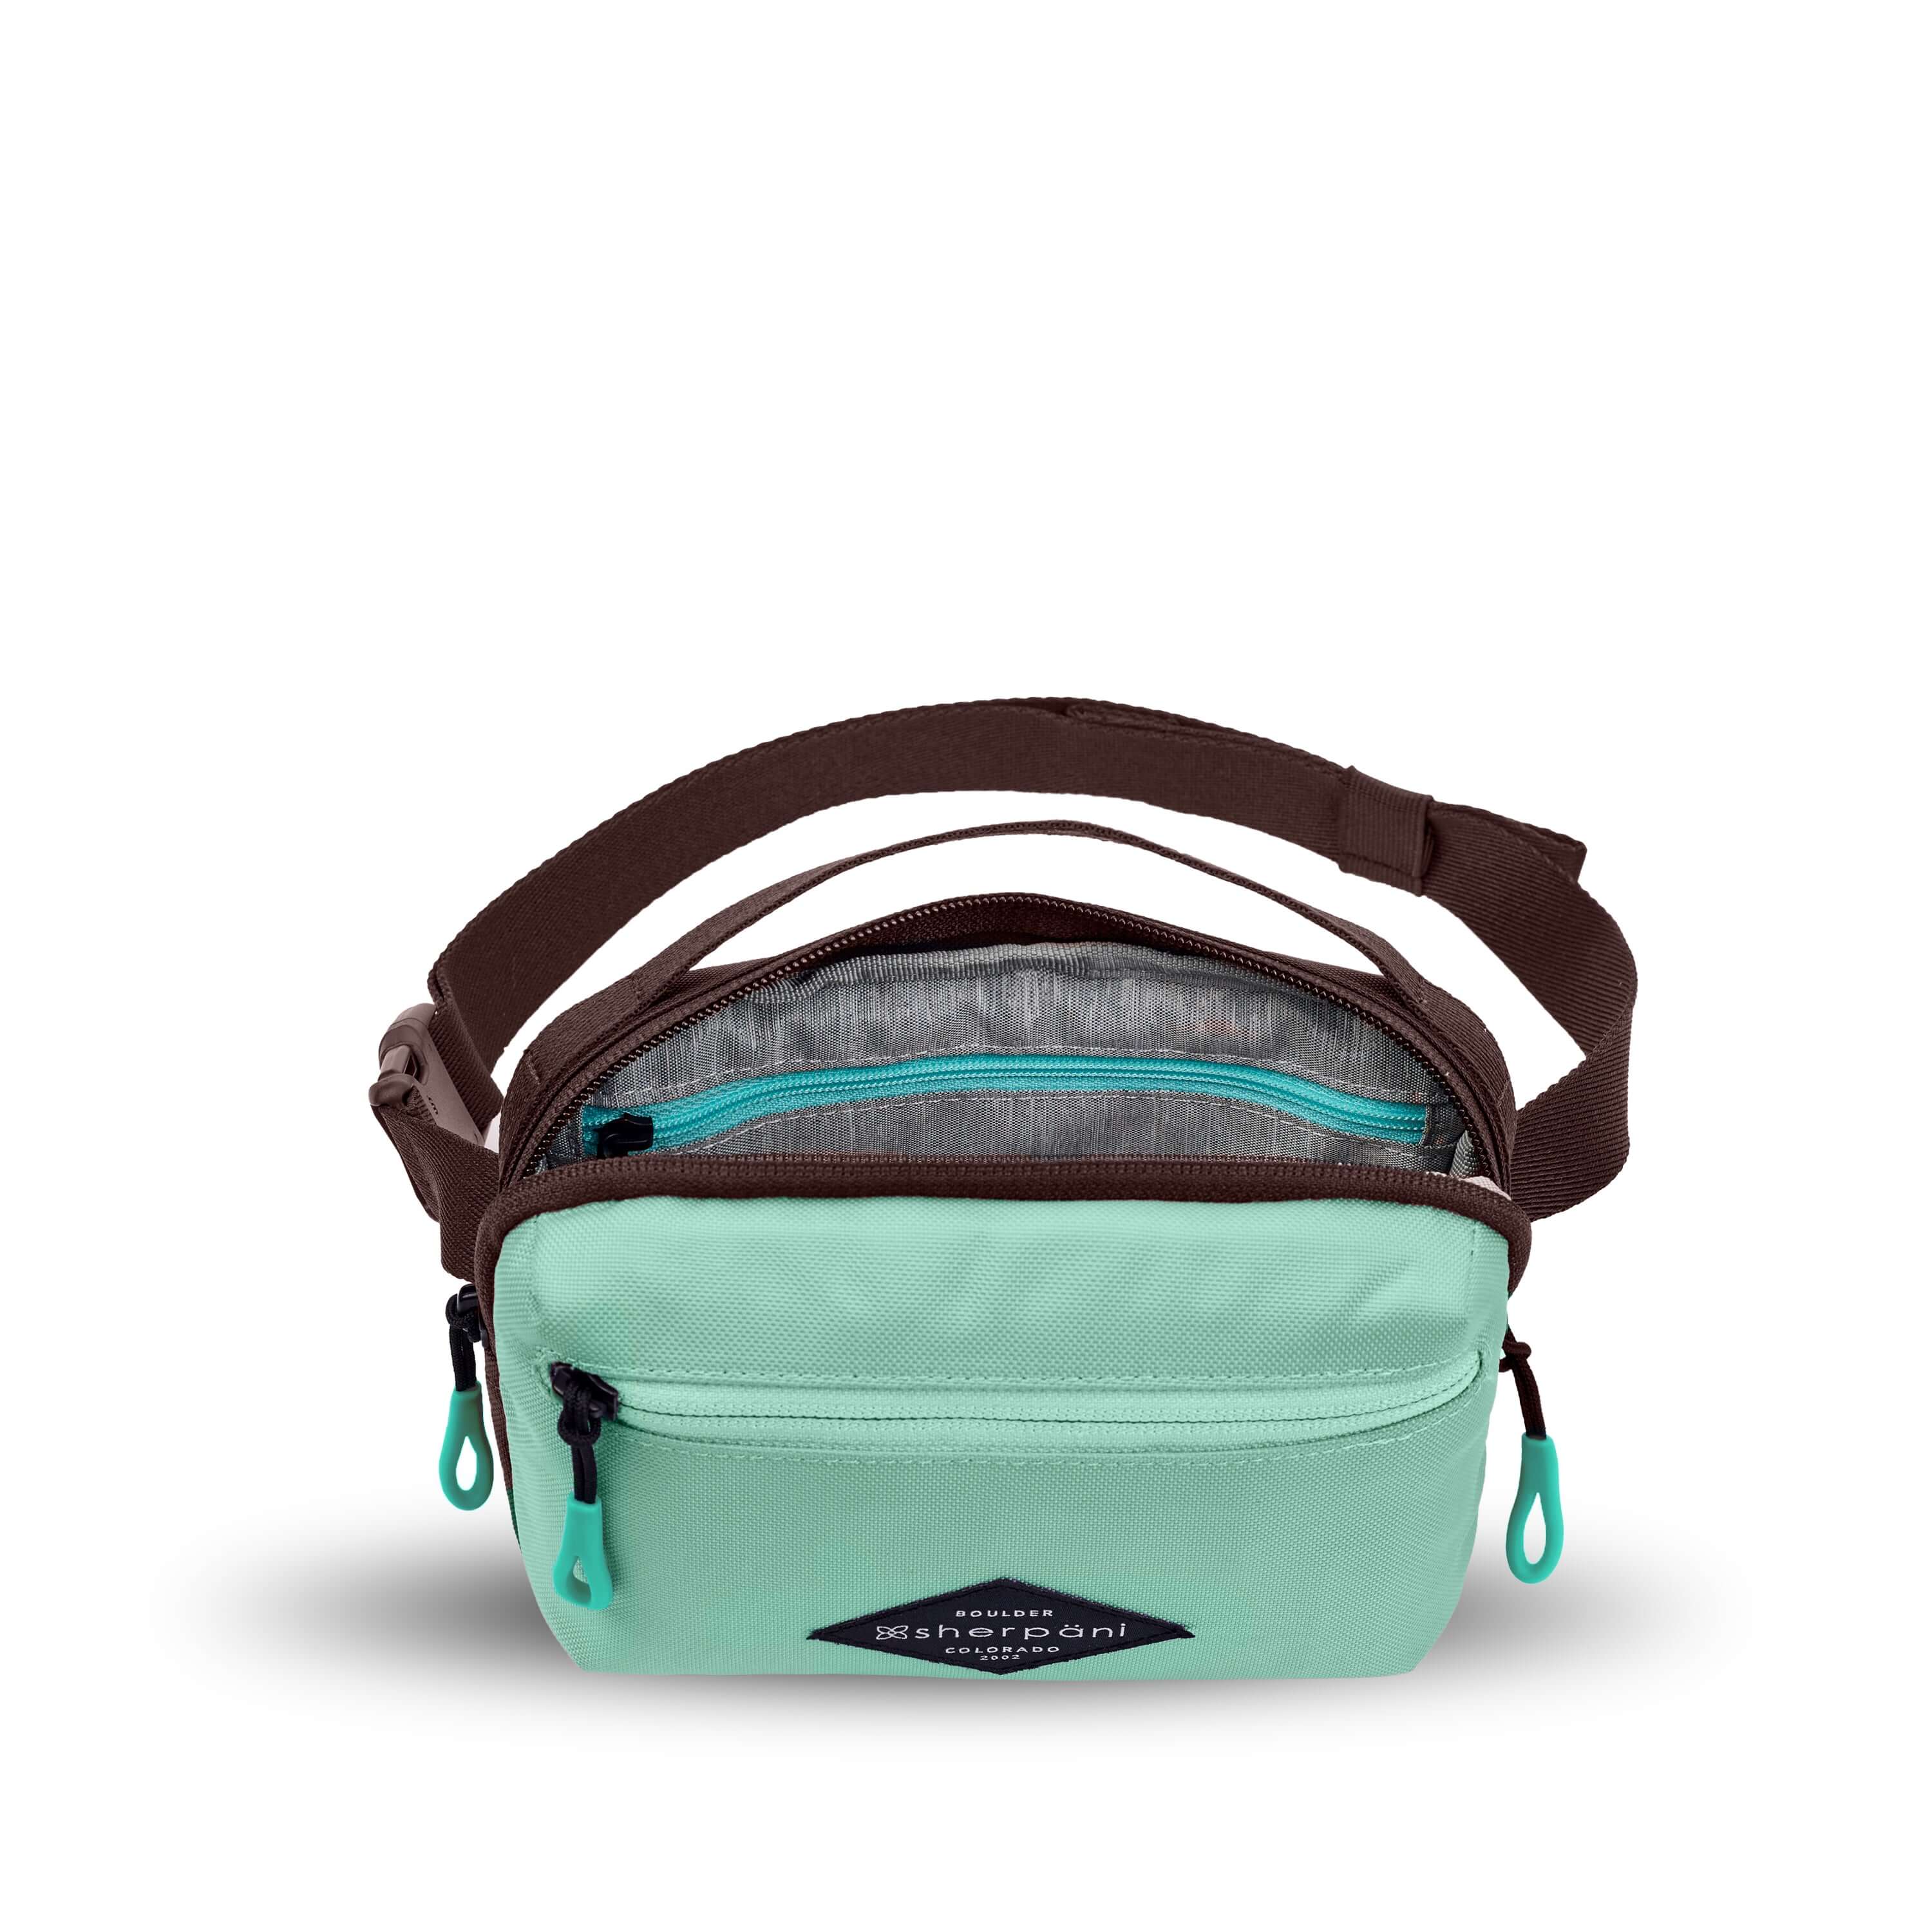 Top view of Sherpani&#39;s fanny pack, the Hyk in Seagreen. The main zipper compartment is open to reveal a light gray interior and an internal zipper pocket.